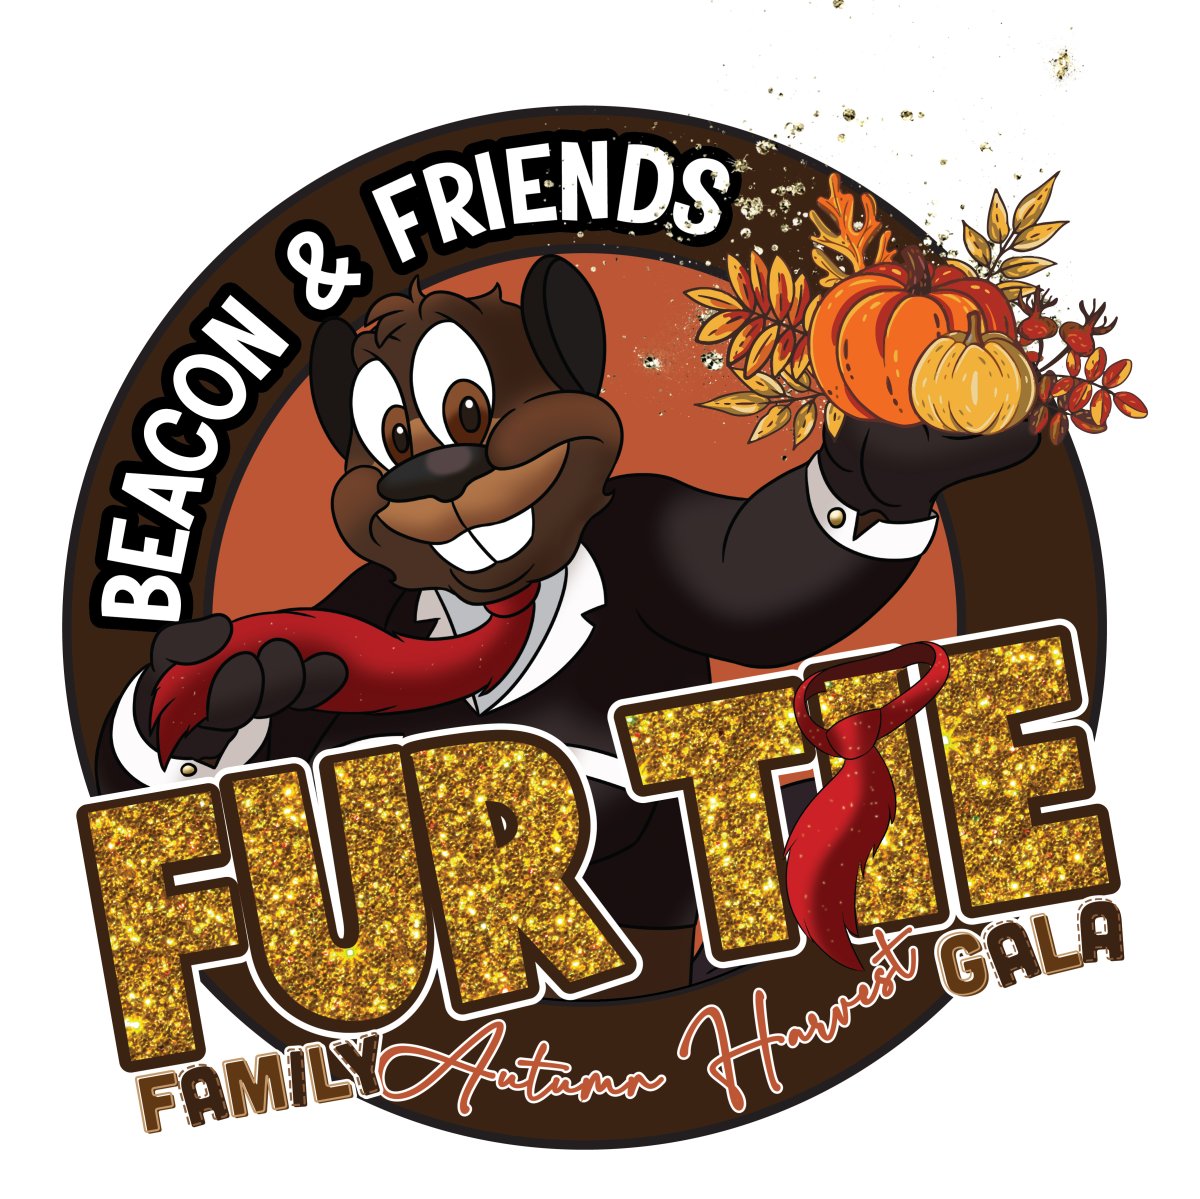 Beacon and Friends Fur Tie Family Autumn Harvest Gala - image